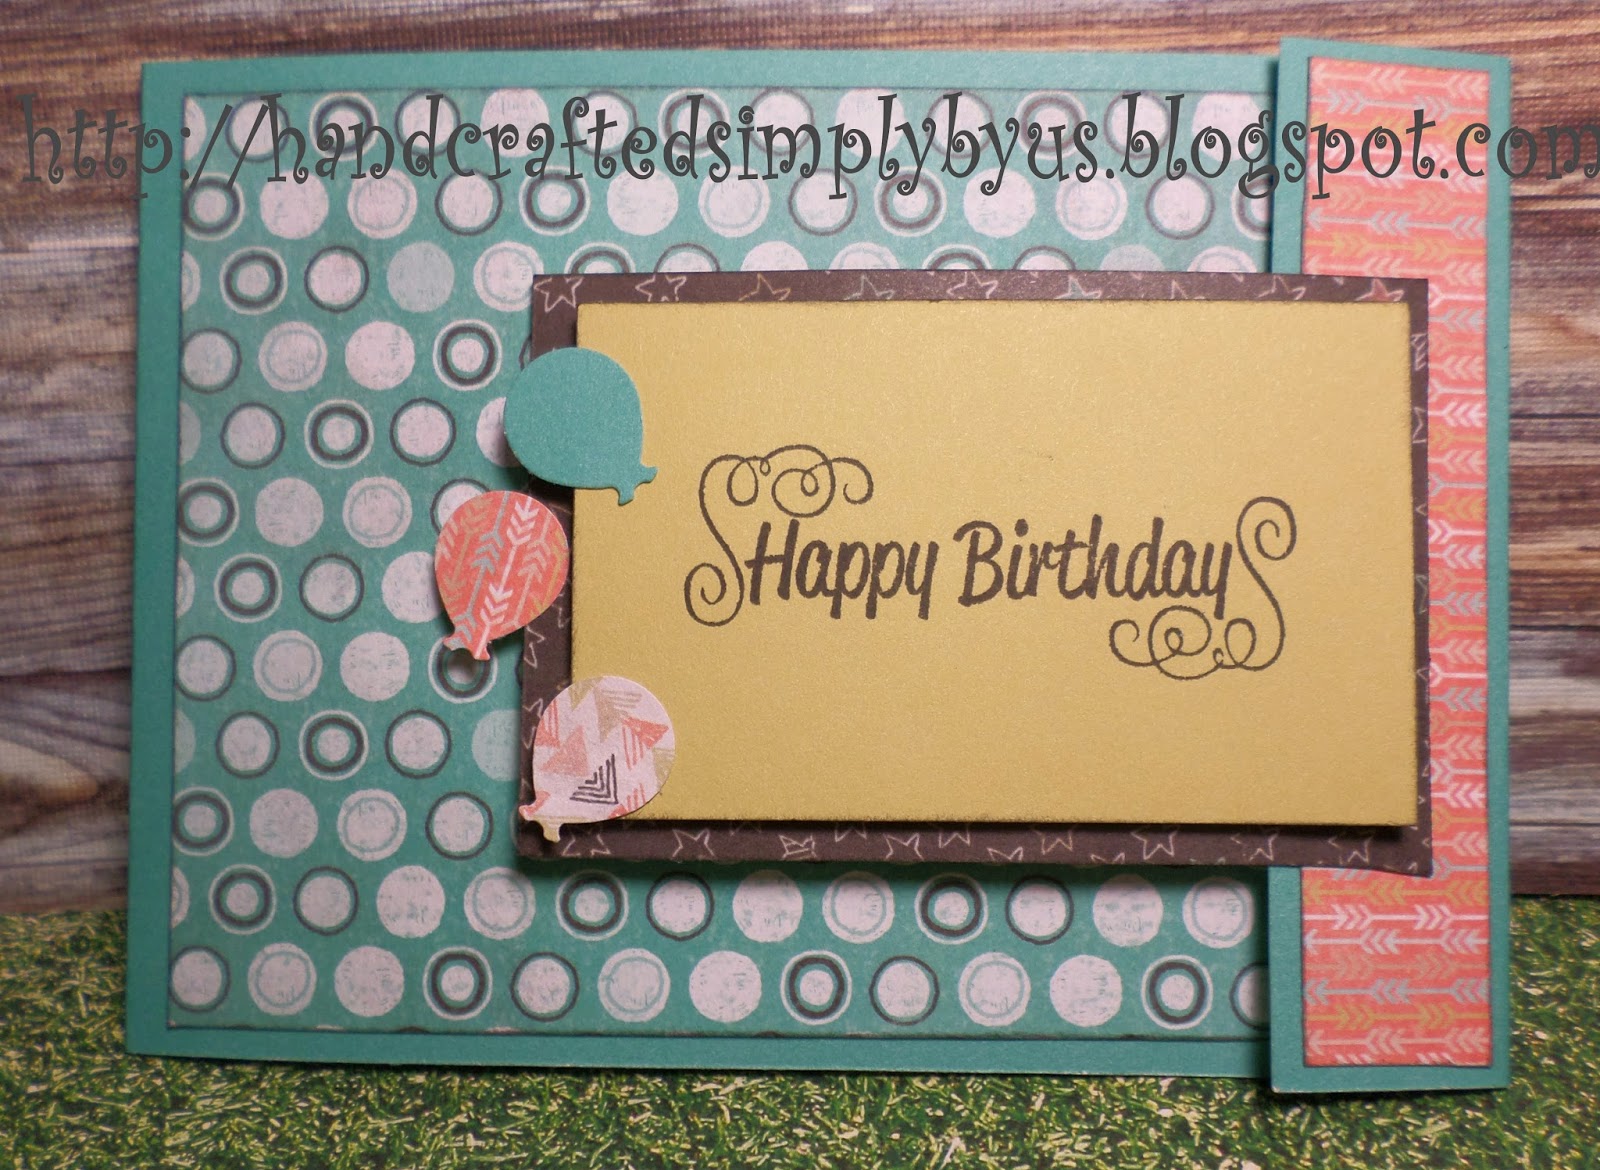 Handcrafted Simply by Us: Happy Birthday Card Day 3